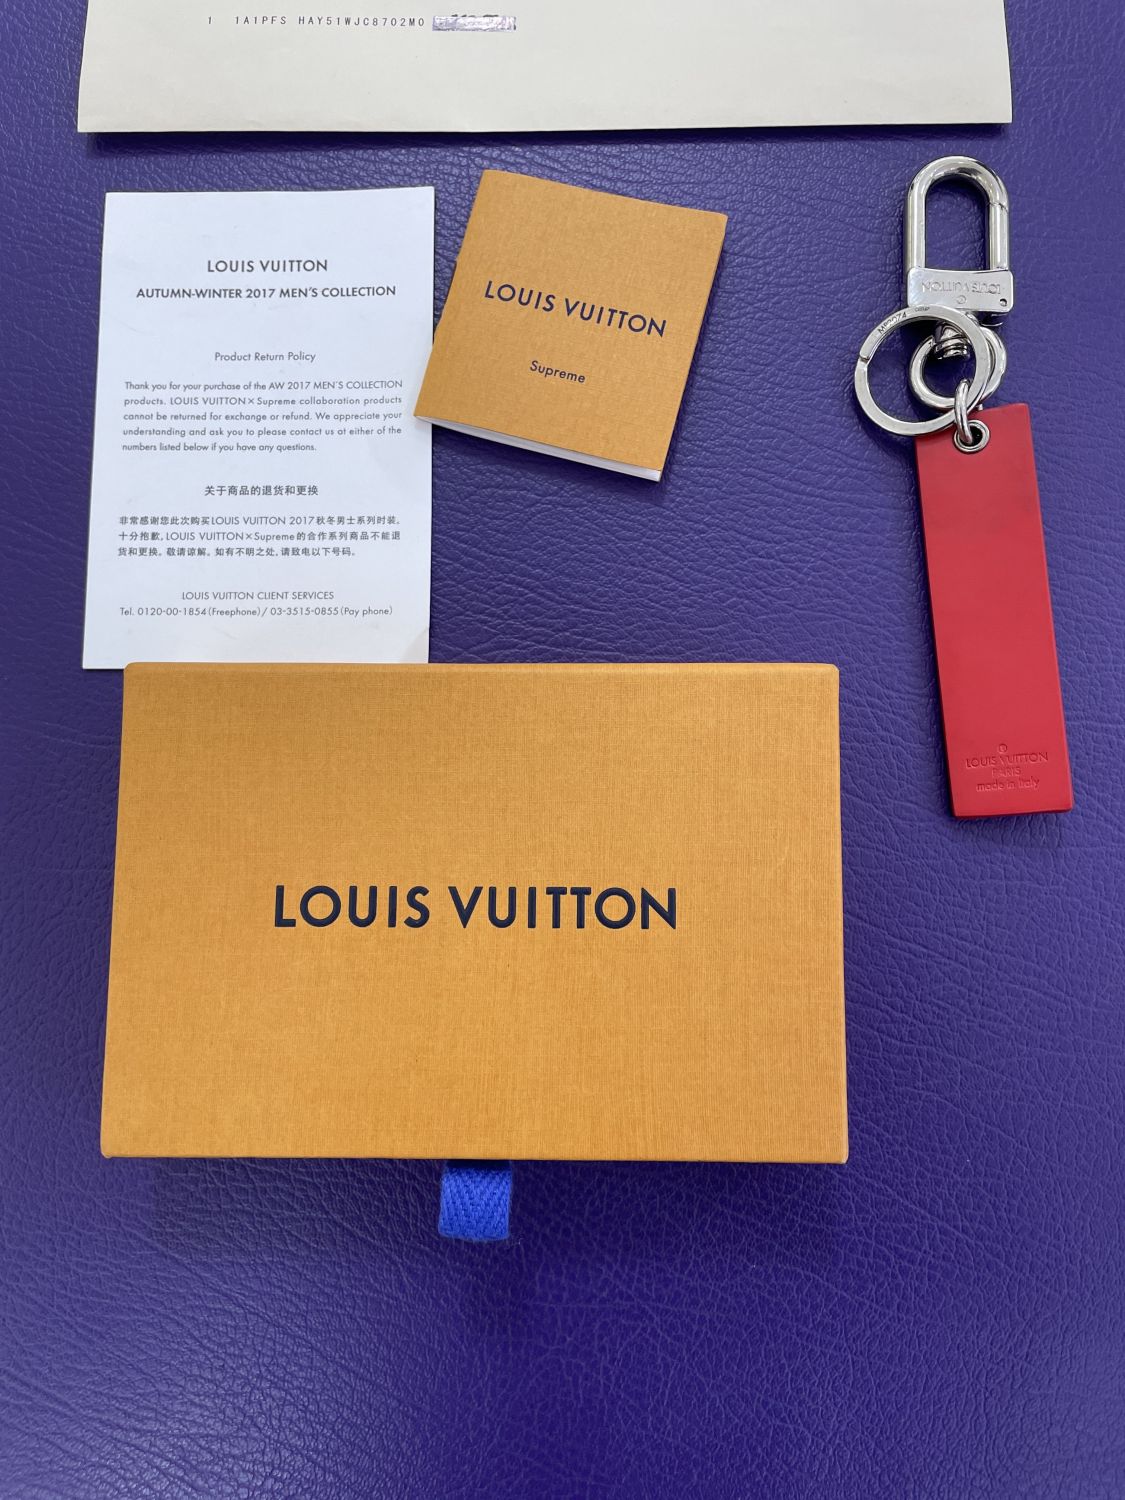 Louis Vuitton Return Policy In Depth Guide